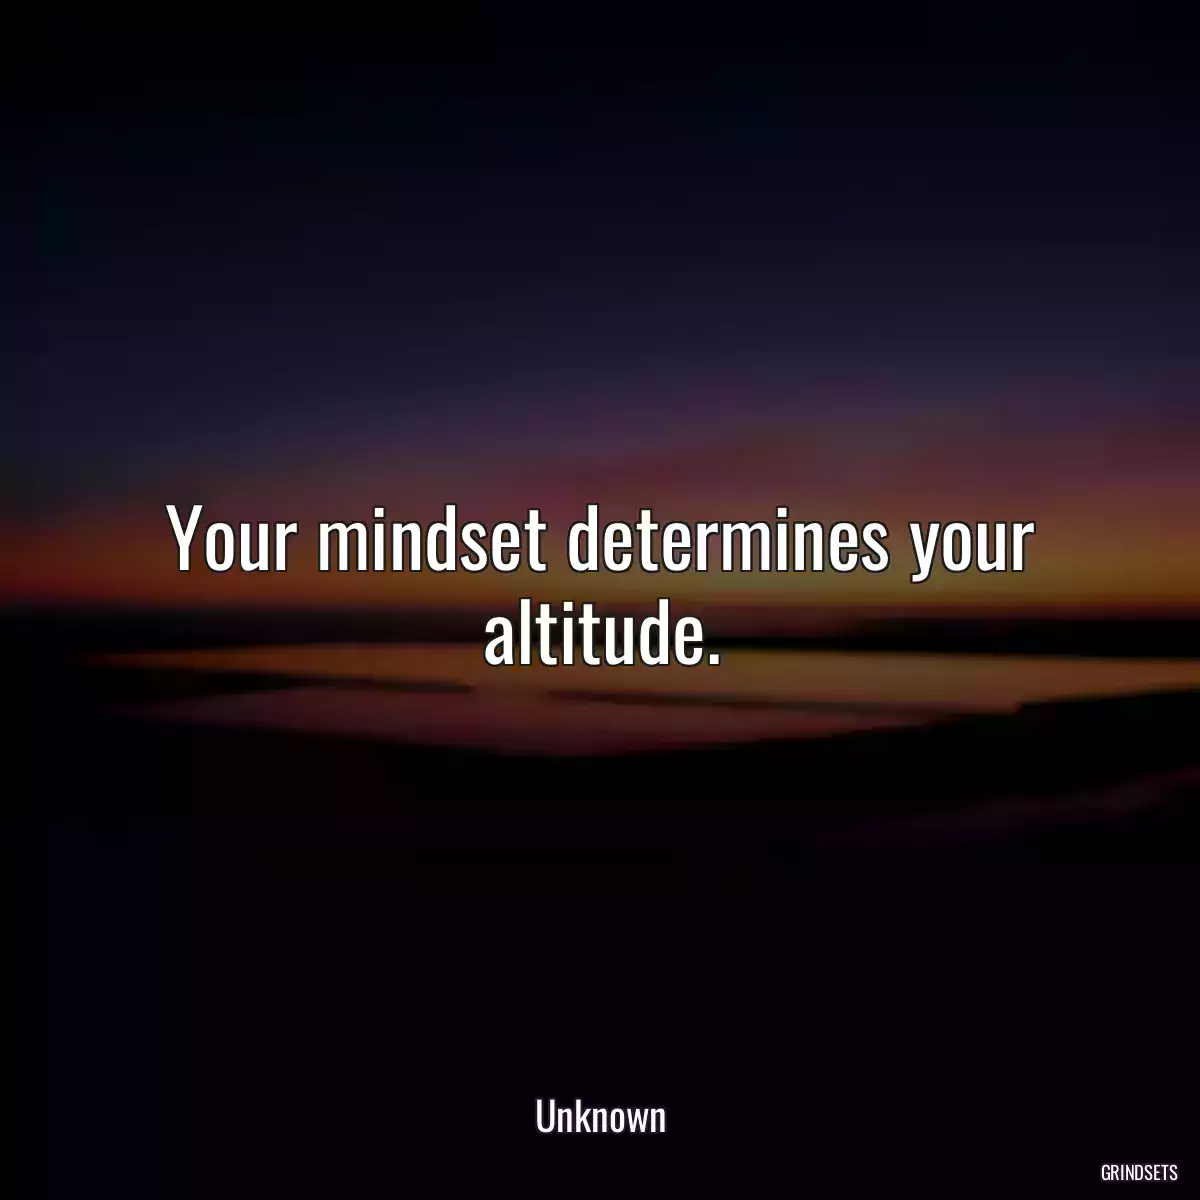 Your mindset determines your altitude.